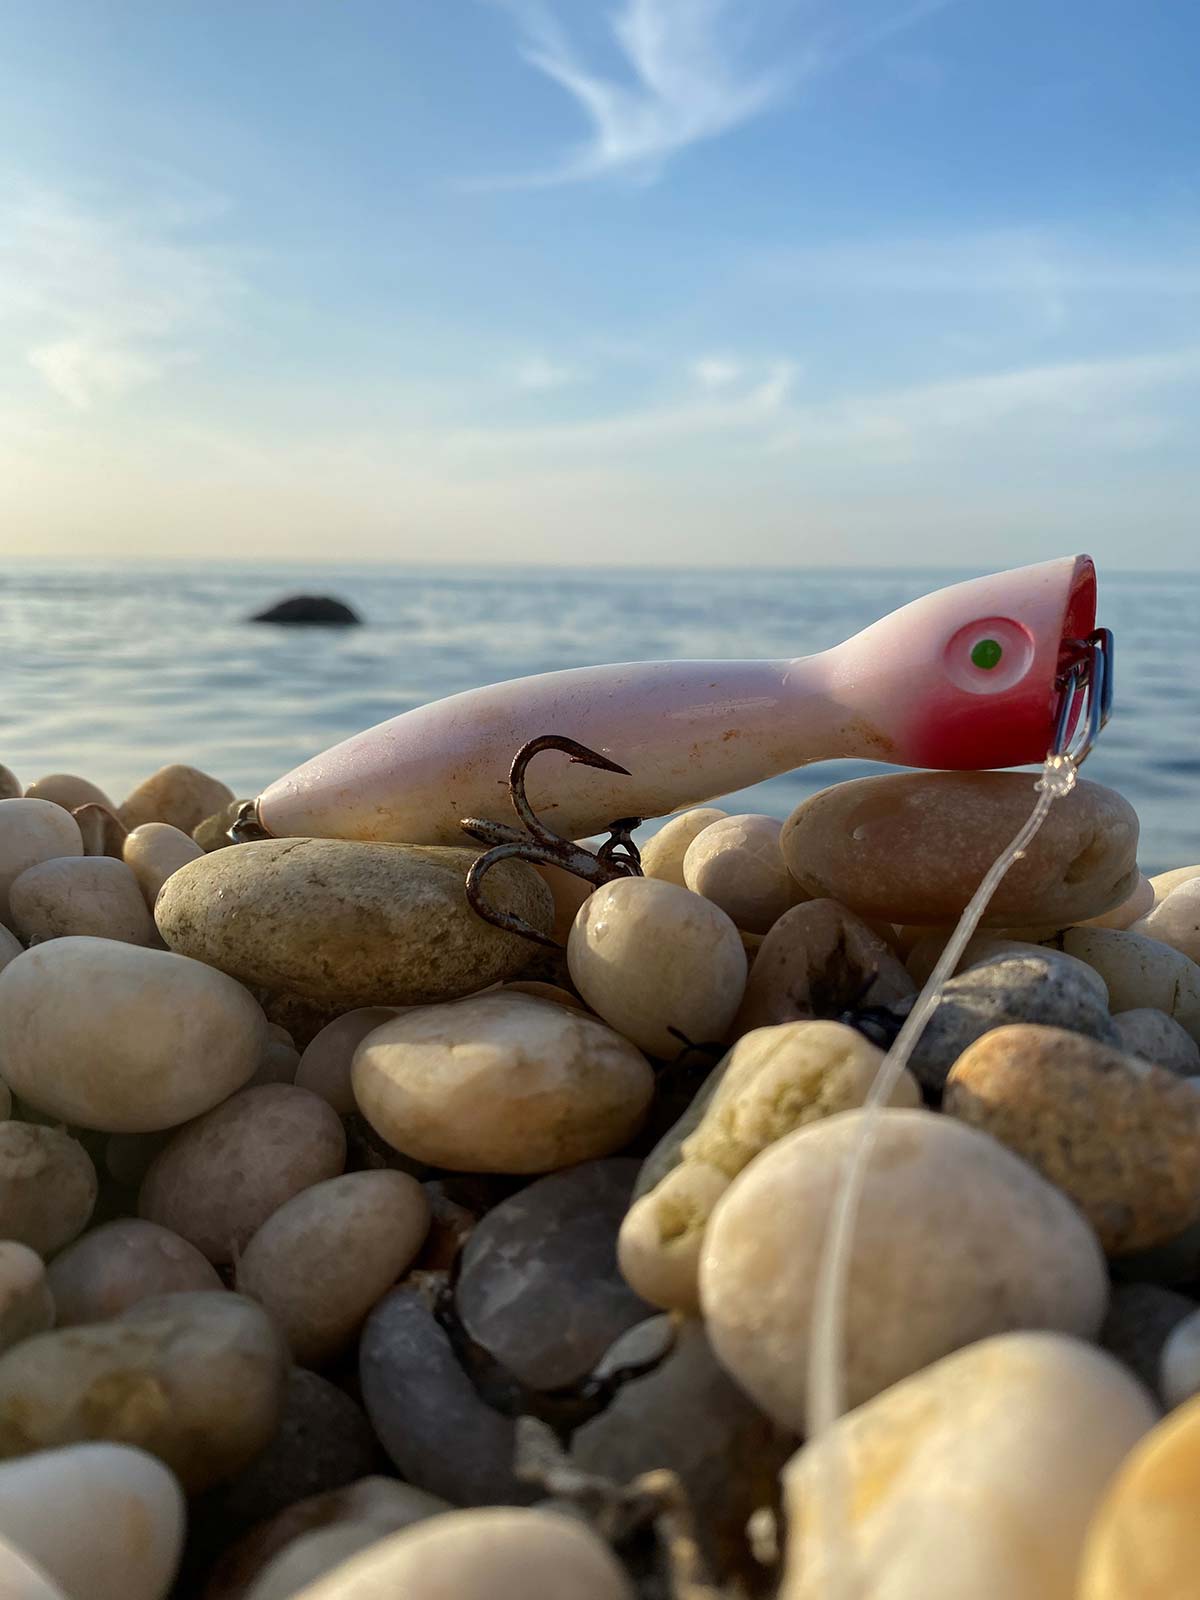 Weird-Looking Hardbaits That Will Catch You Fish